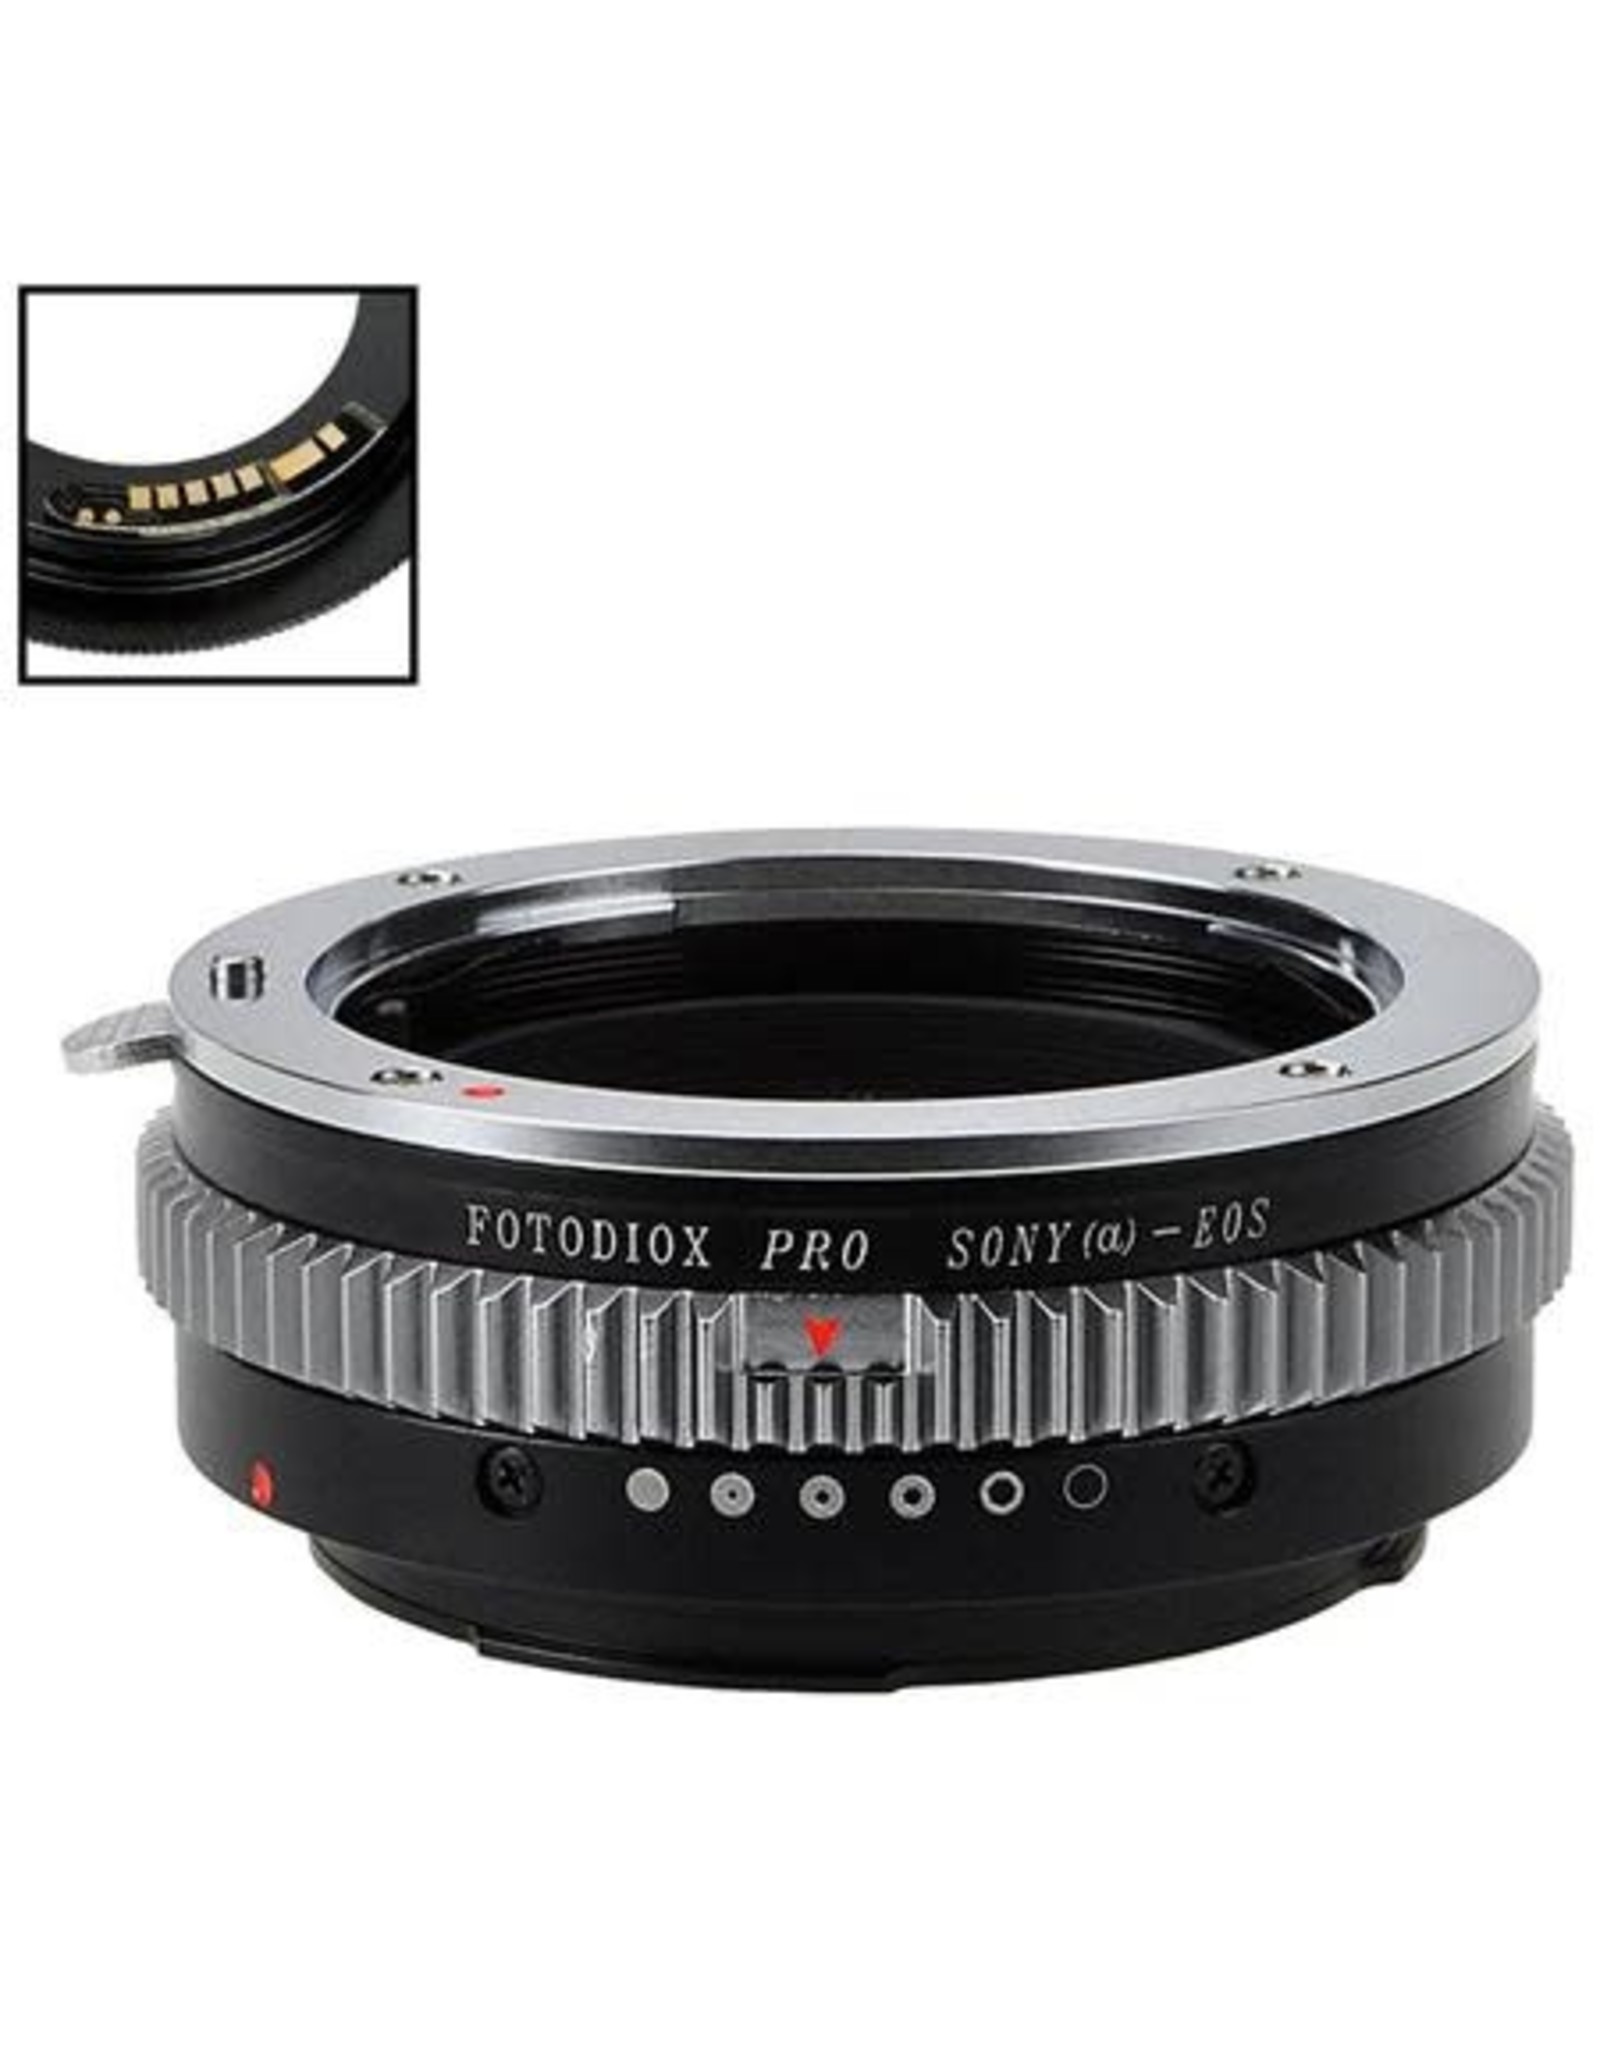 Fotodiox Pro Lens Adapter Sony A-Mount (Minolta AF) Lens to Canon EOS Cameras